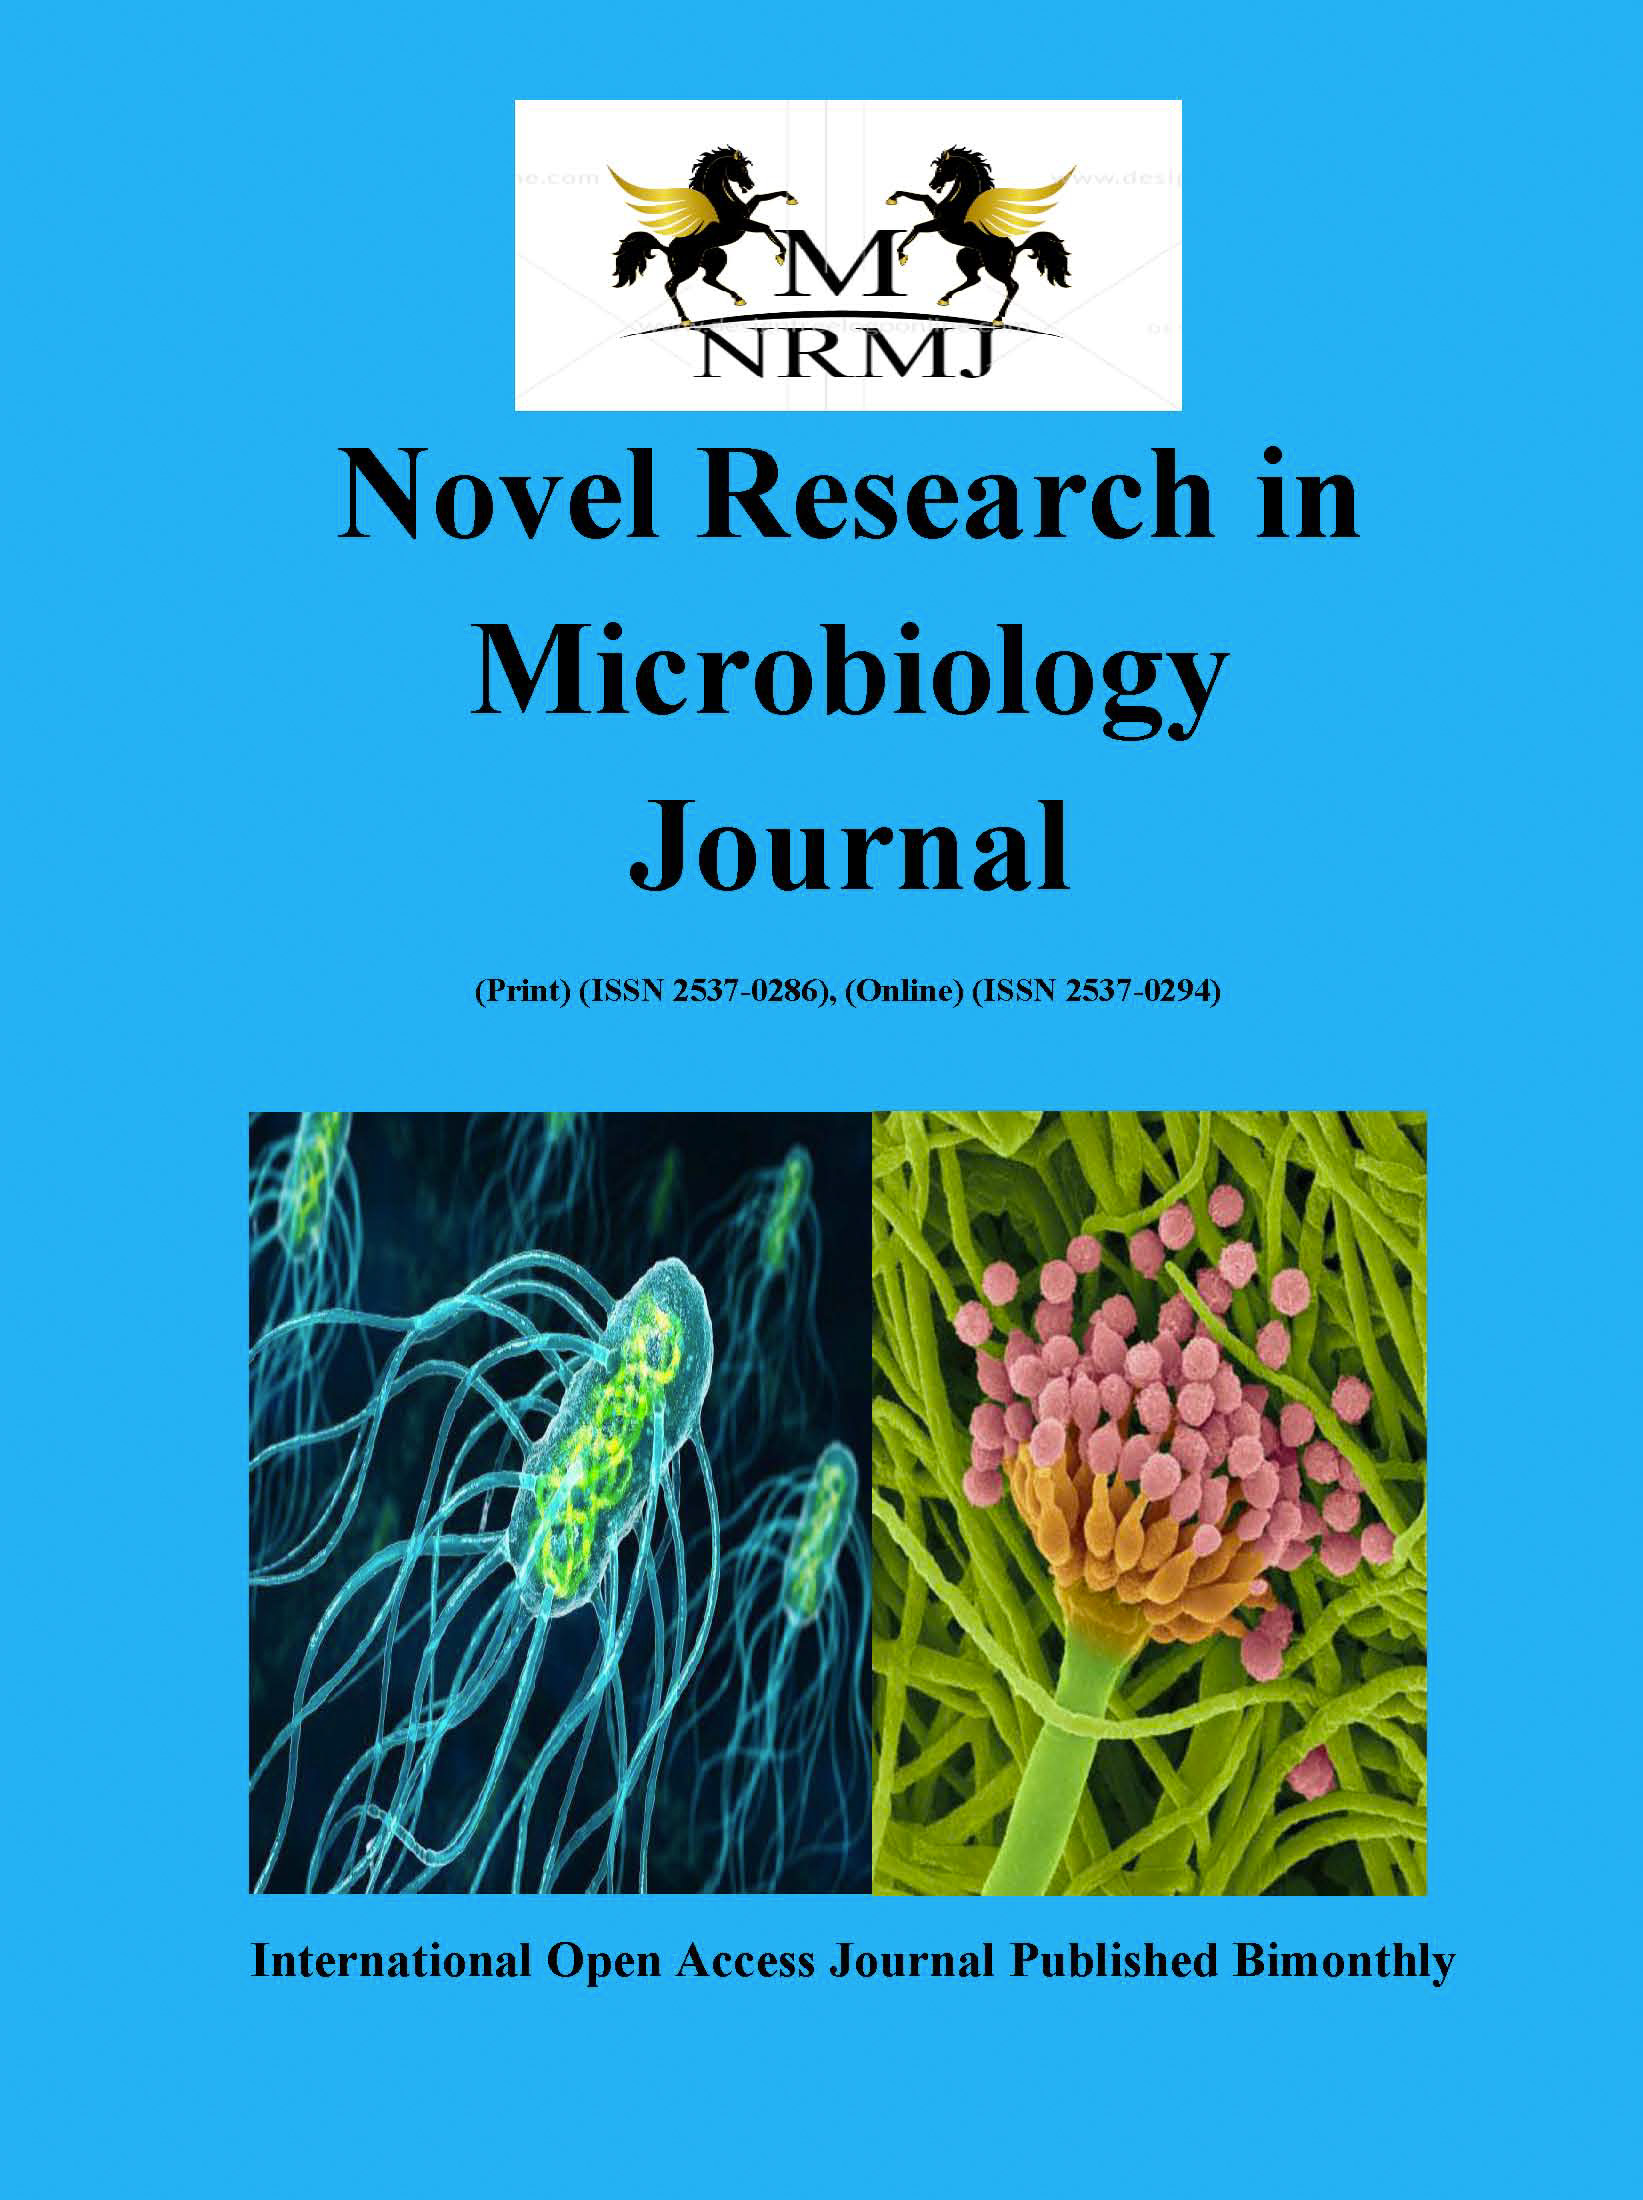 Novel Research in Microbiology